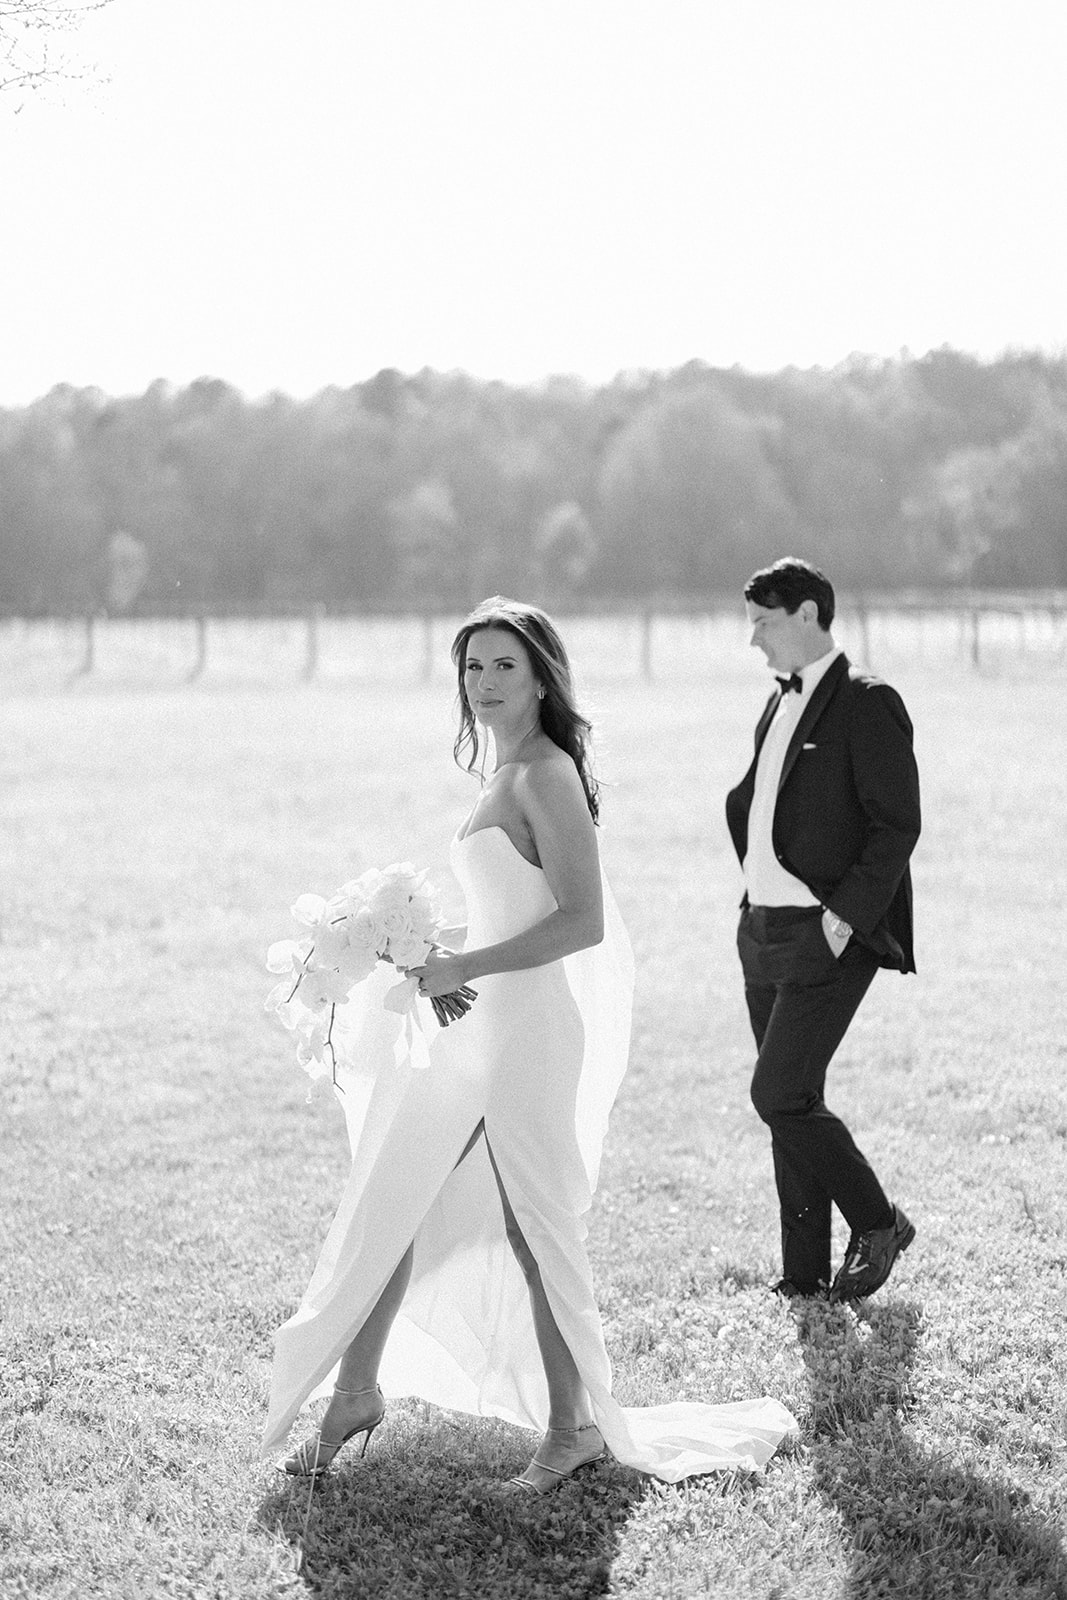 Sultry Surprise Wedding at Sunset Lodge in Little Rock, Arkansas